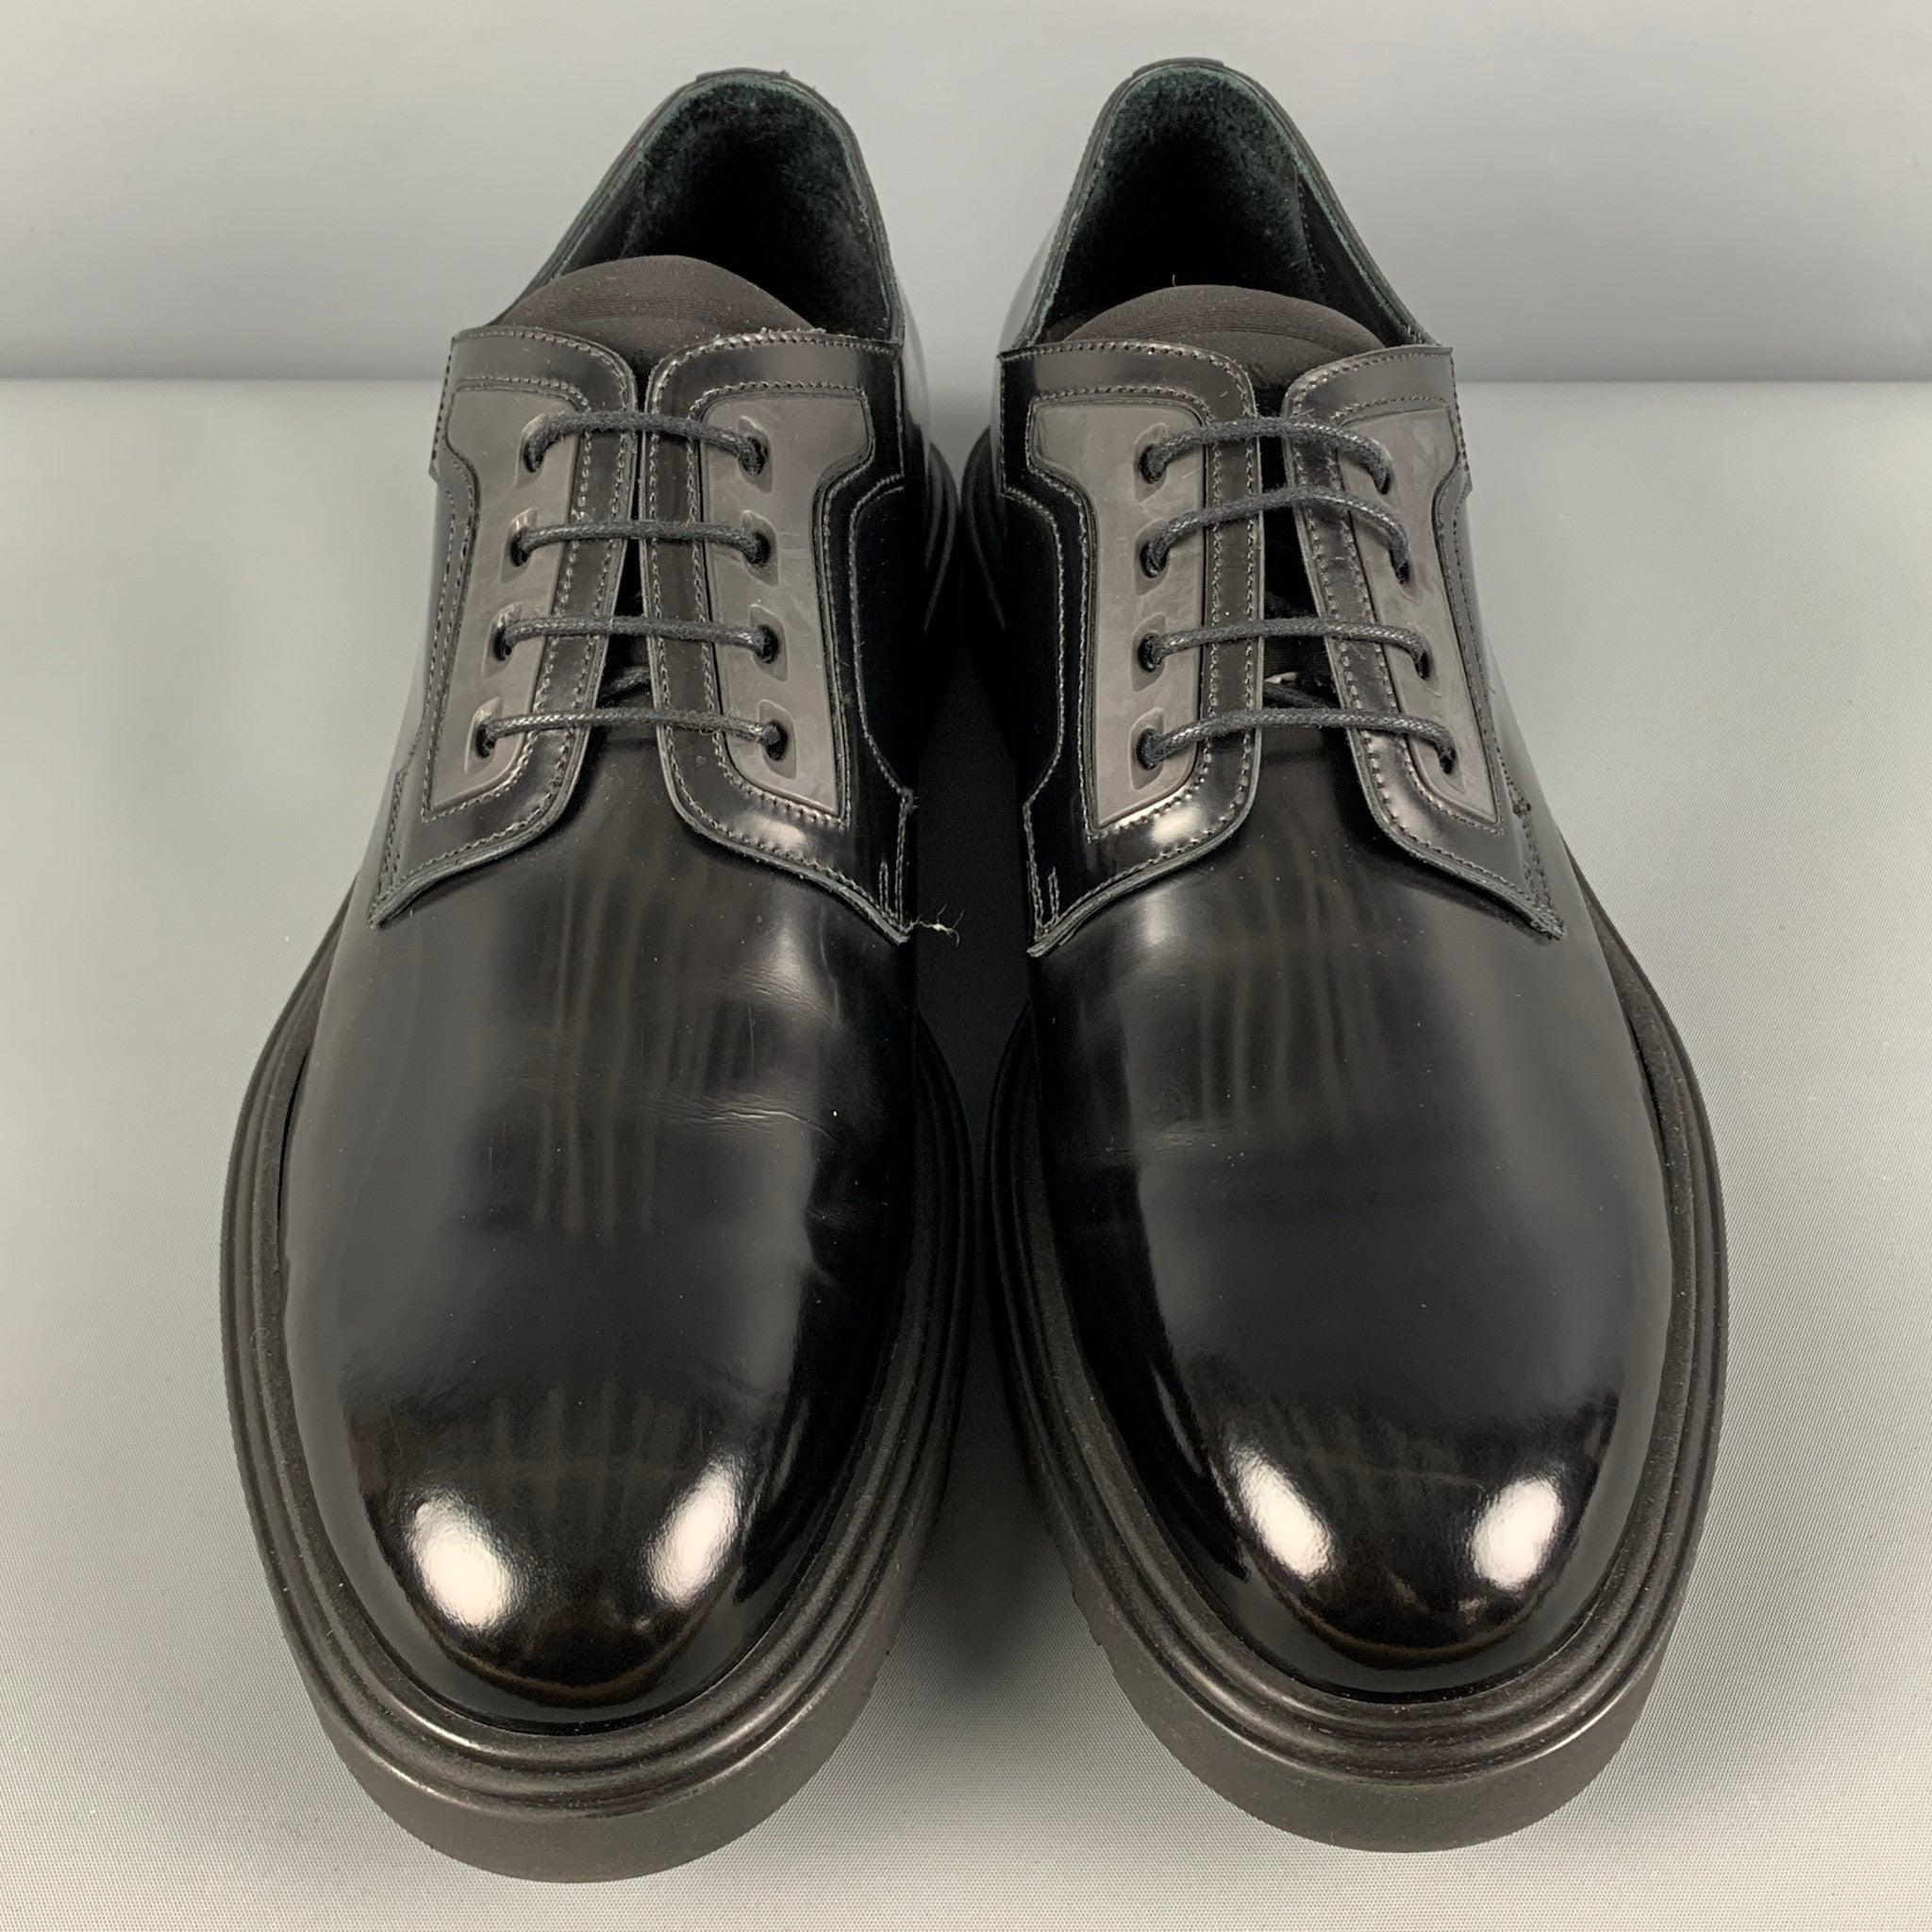 Men's PAUL SMITH Size 11 Black Leather Lace Up Shoes For Sale